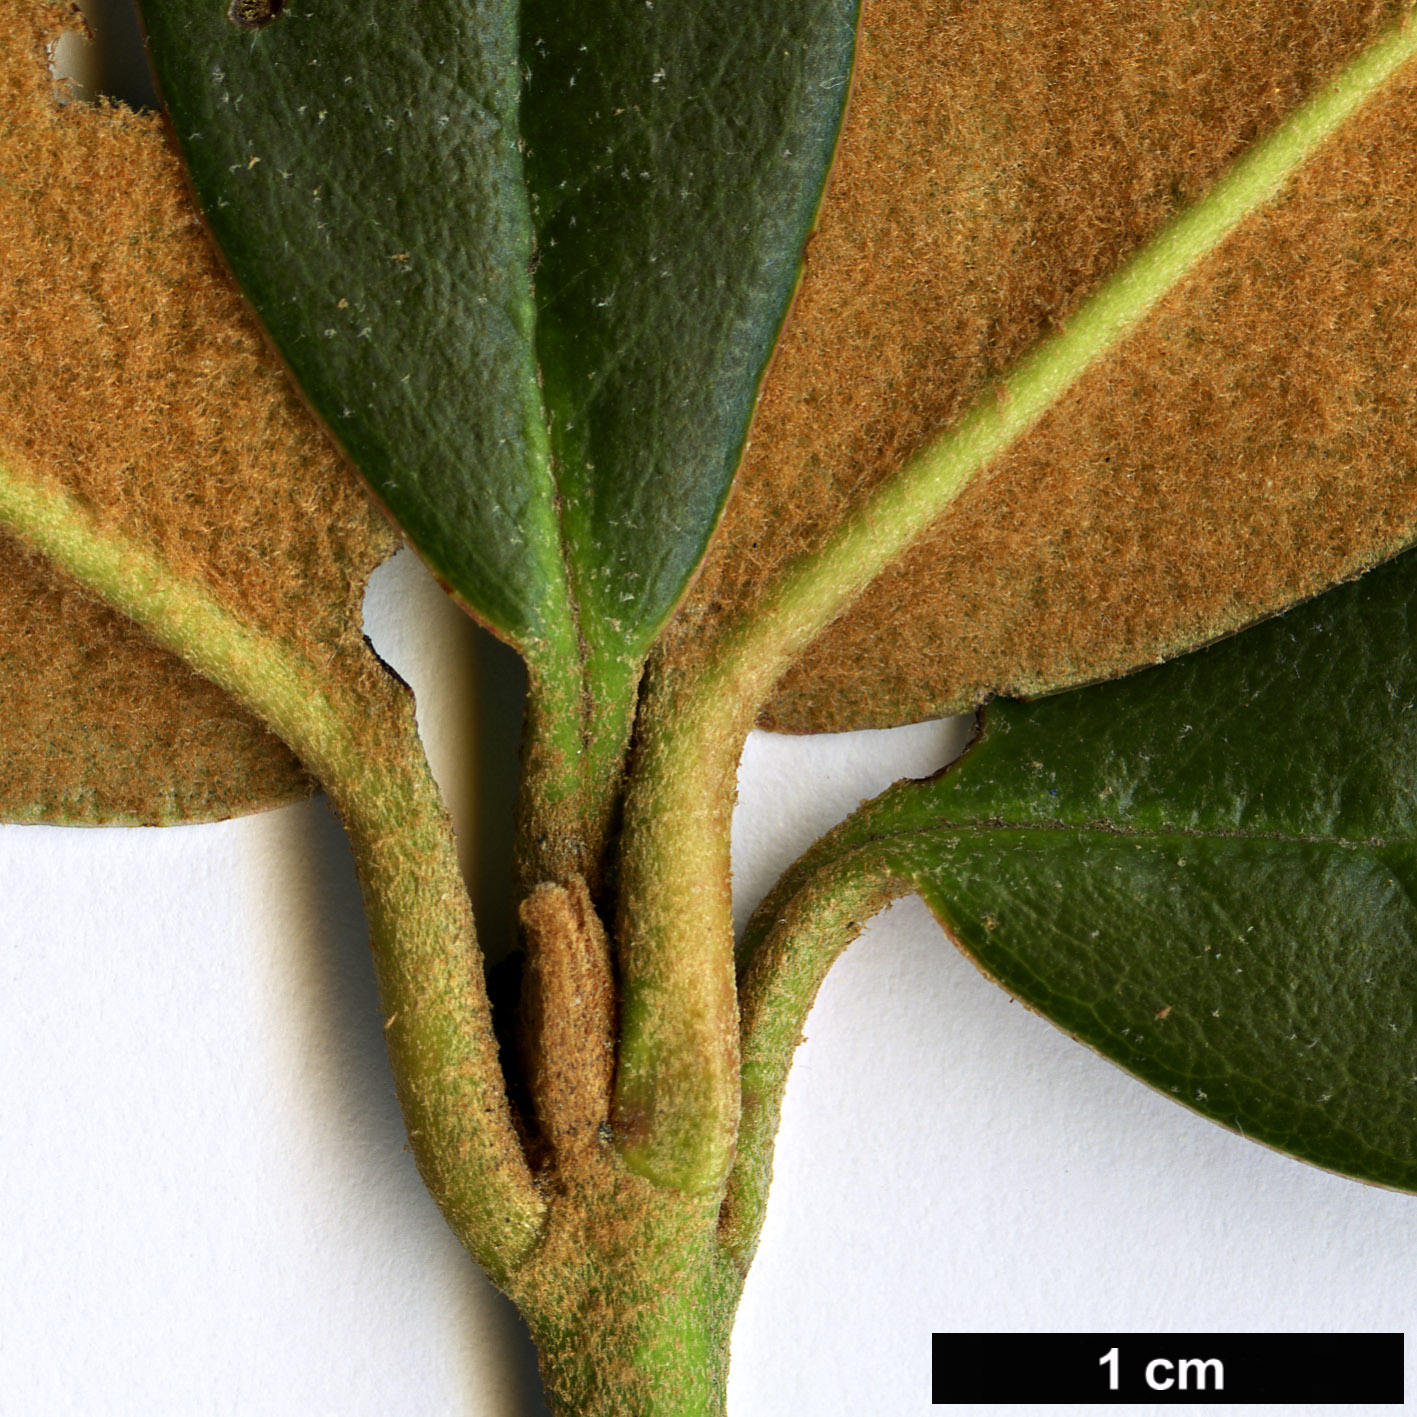 High resolution image: Family: Ericaceae - Genus: Rhododendron - Taxon: haematodes